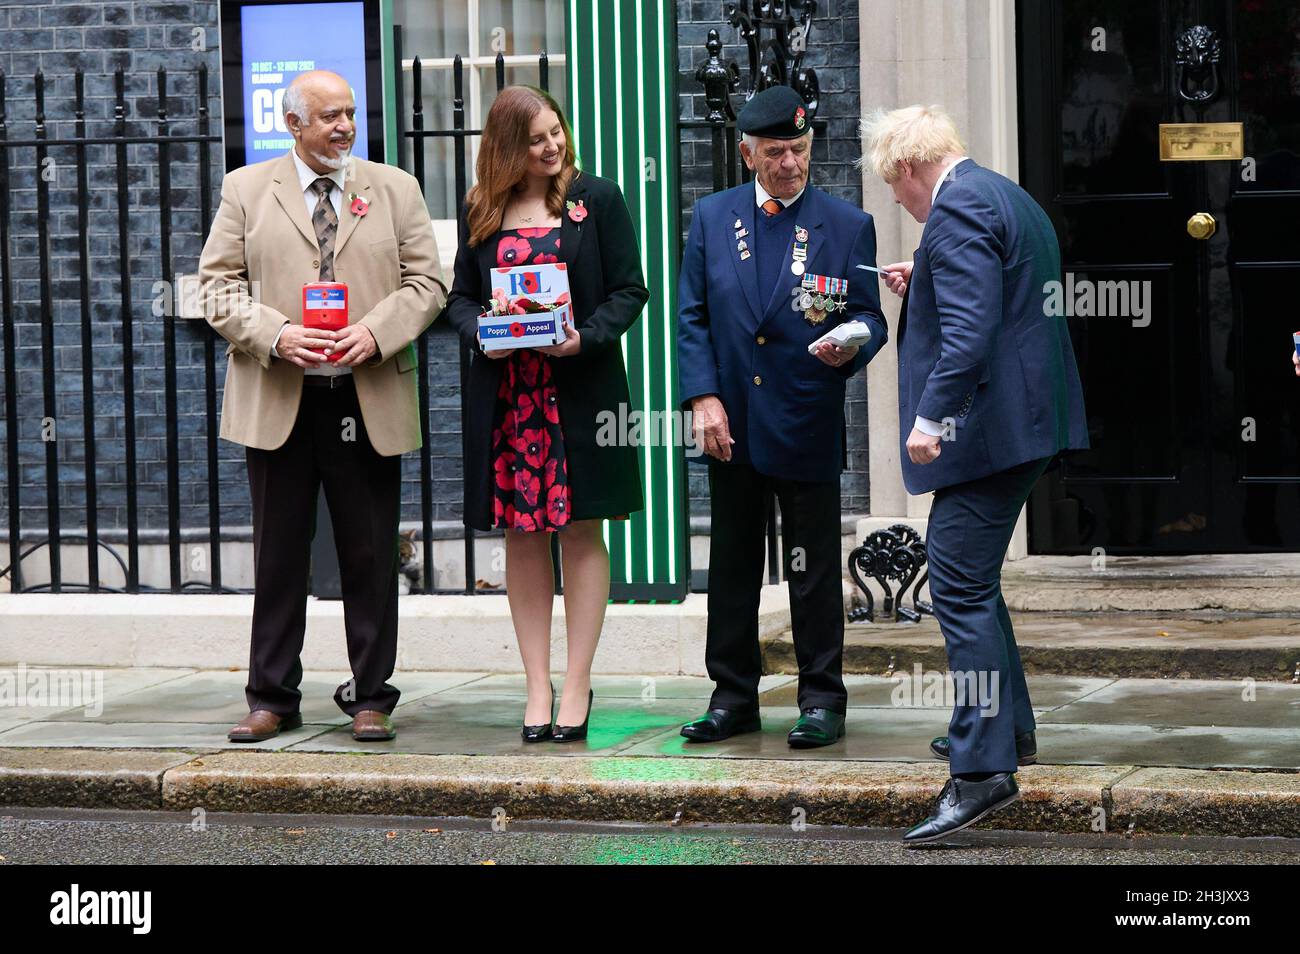 London, UK. 29th Oct, 2021. Prime Minister Boris Johnson meets with fundraisers for the Royal British Legion and purchases a poppy in front of Number 10 Downing Street, London Credit: Alan D West/Alamy Live News Stock Photo